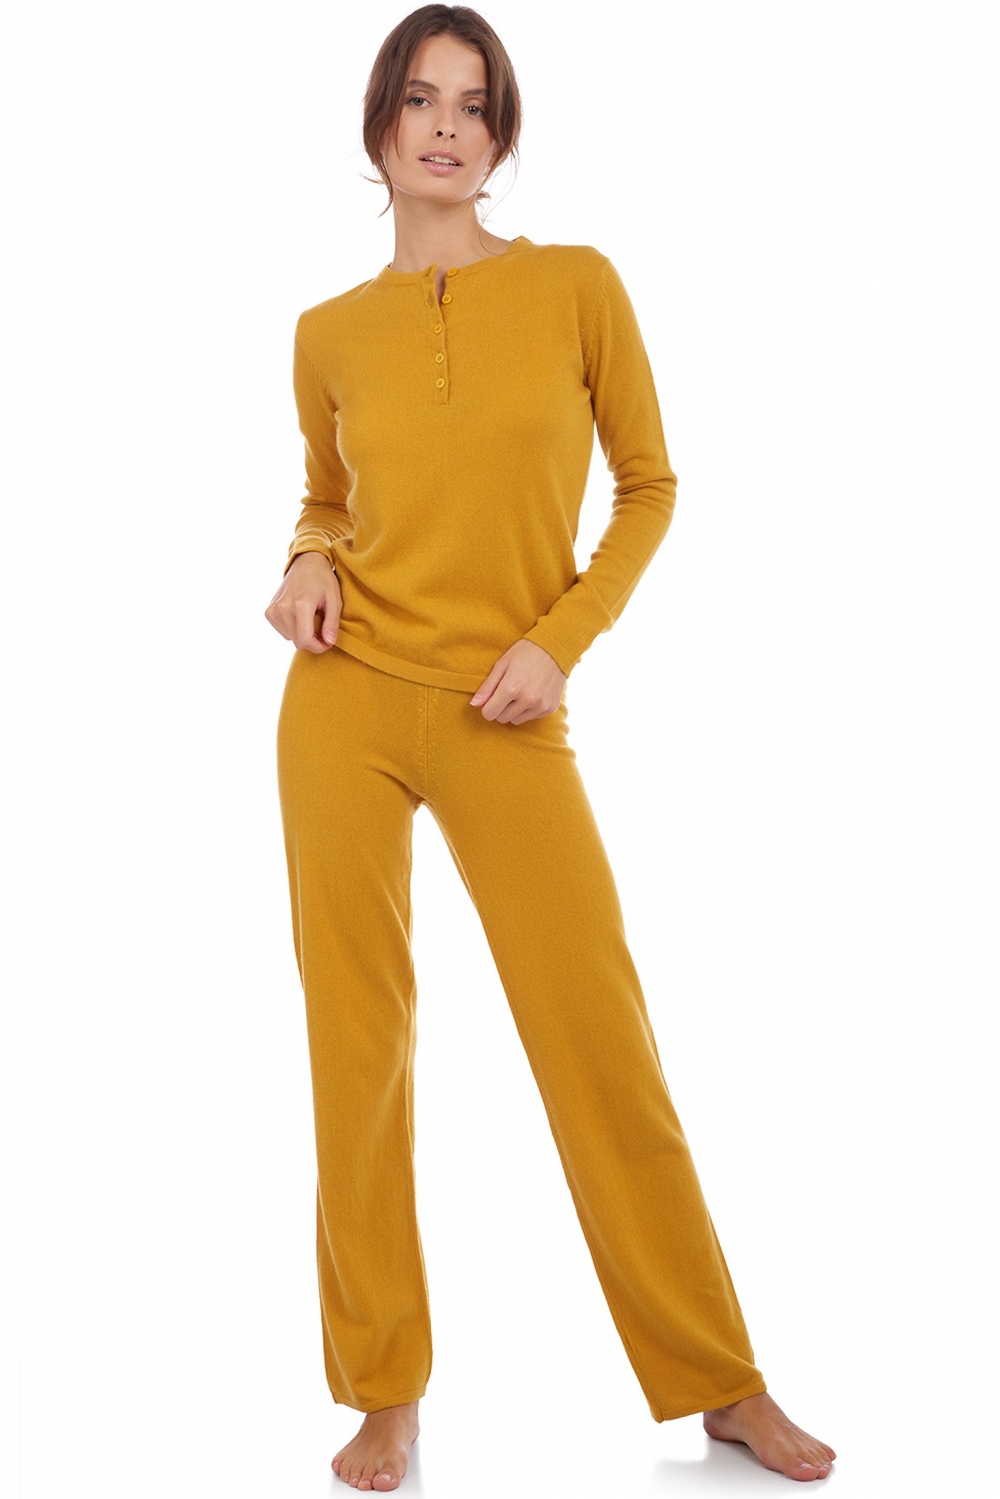 Cashmere ladies cocooning loan mustard s